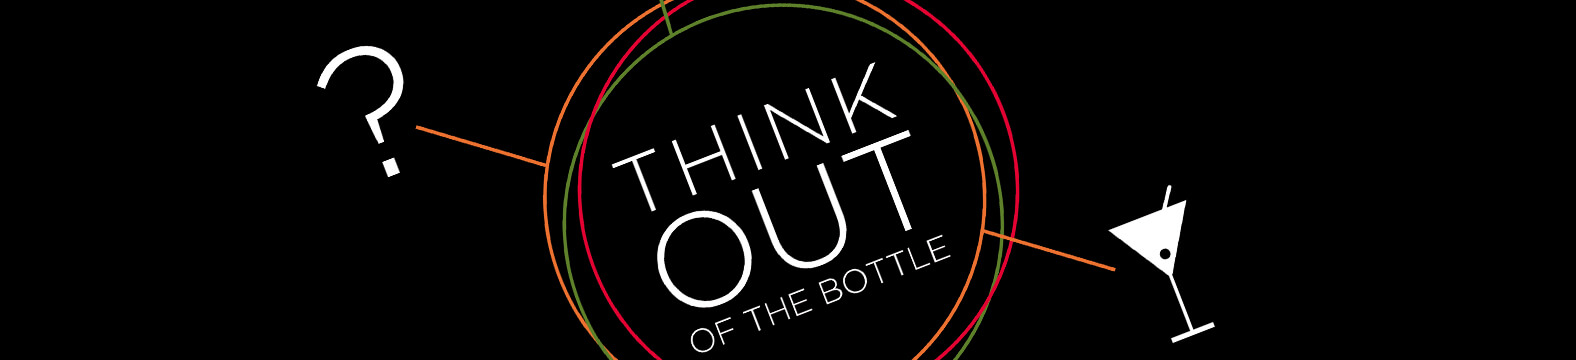 Ptop_Offley Think out of the bottle